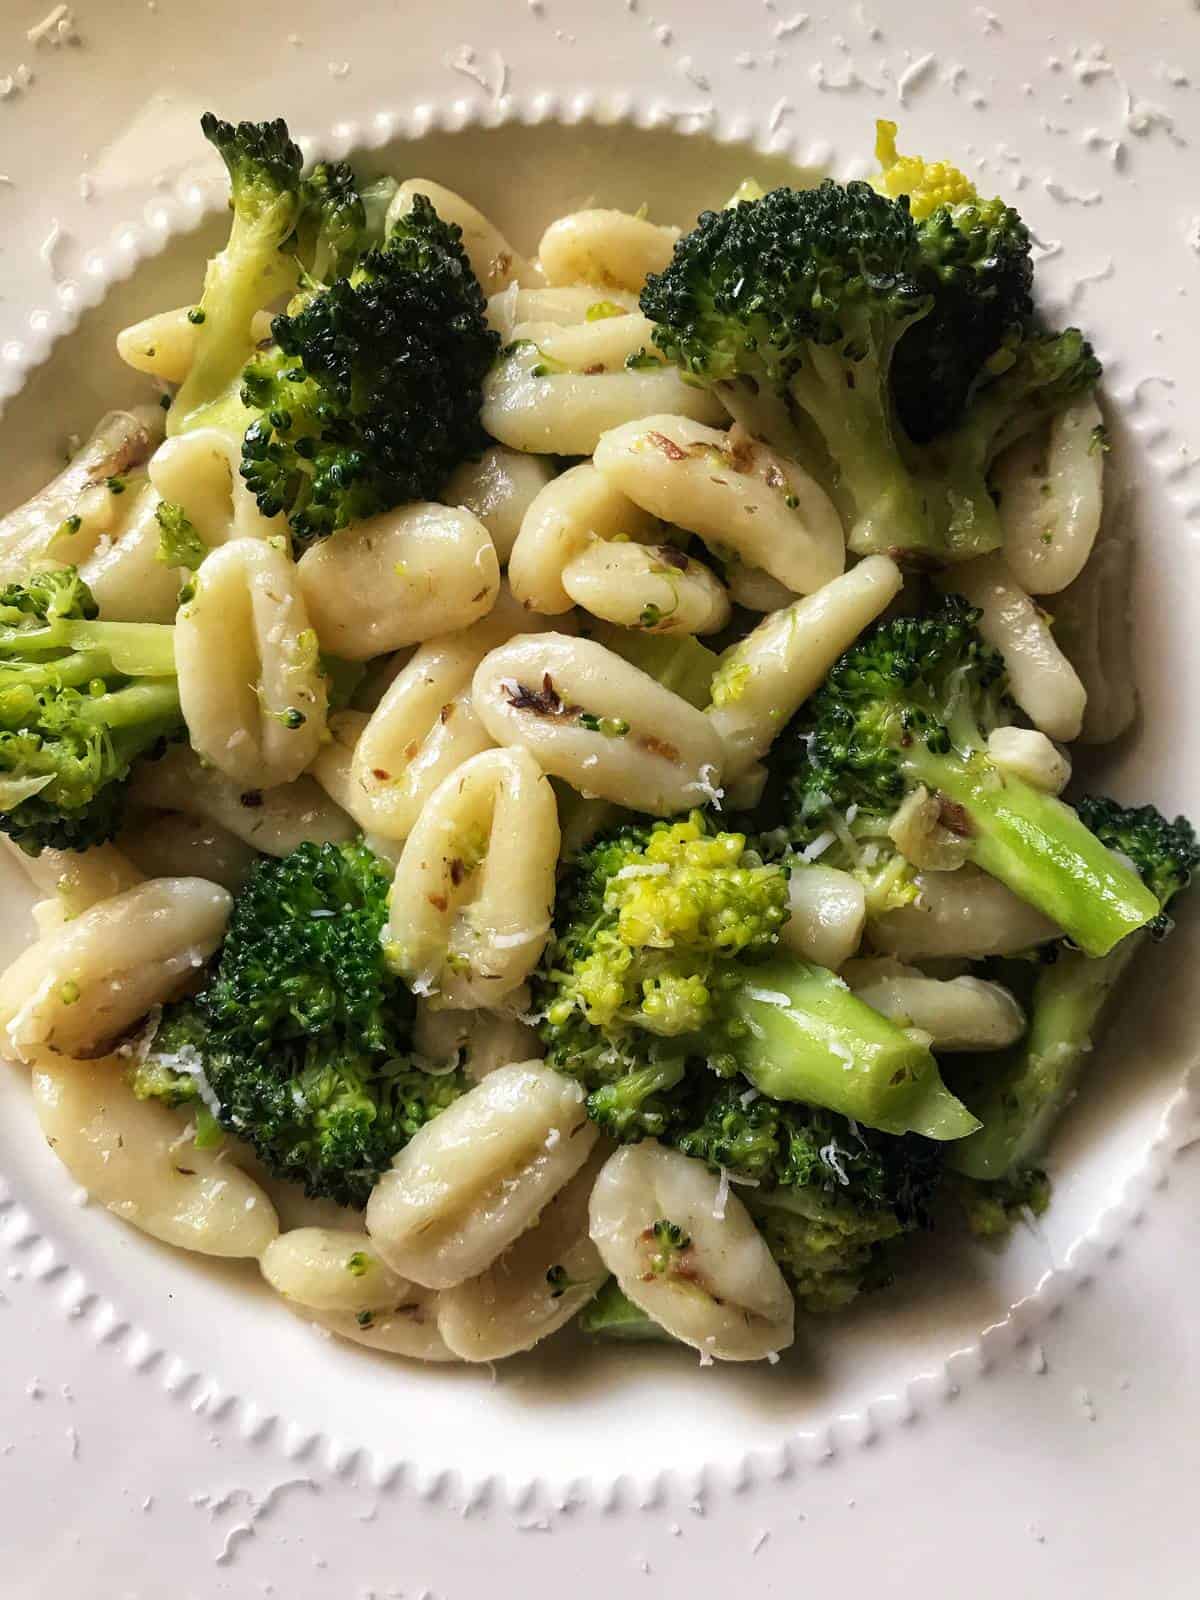 Cavatelli and broccoli in a white dinner plate.